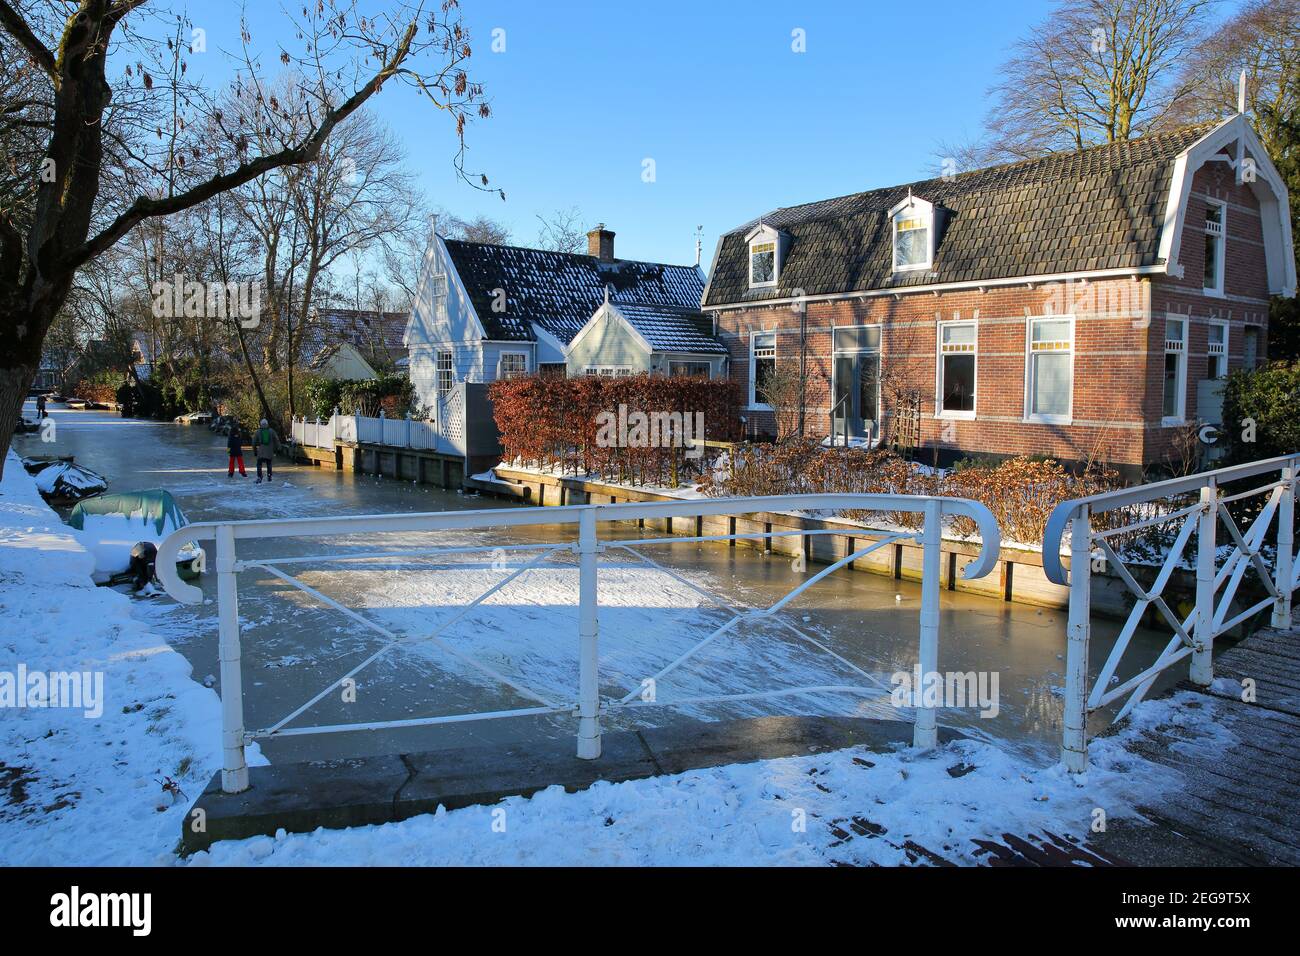 Winter snow and  frozen canals in Broek in Waterland, a small town with traditional old and painted wooden houses, North Holland, Netherlands. Stock Photo